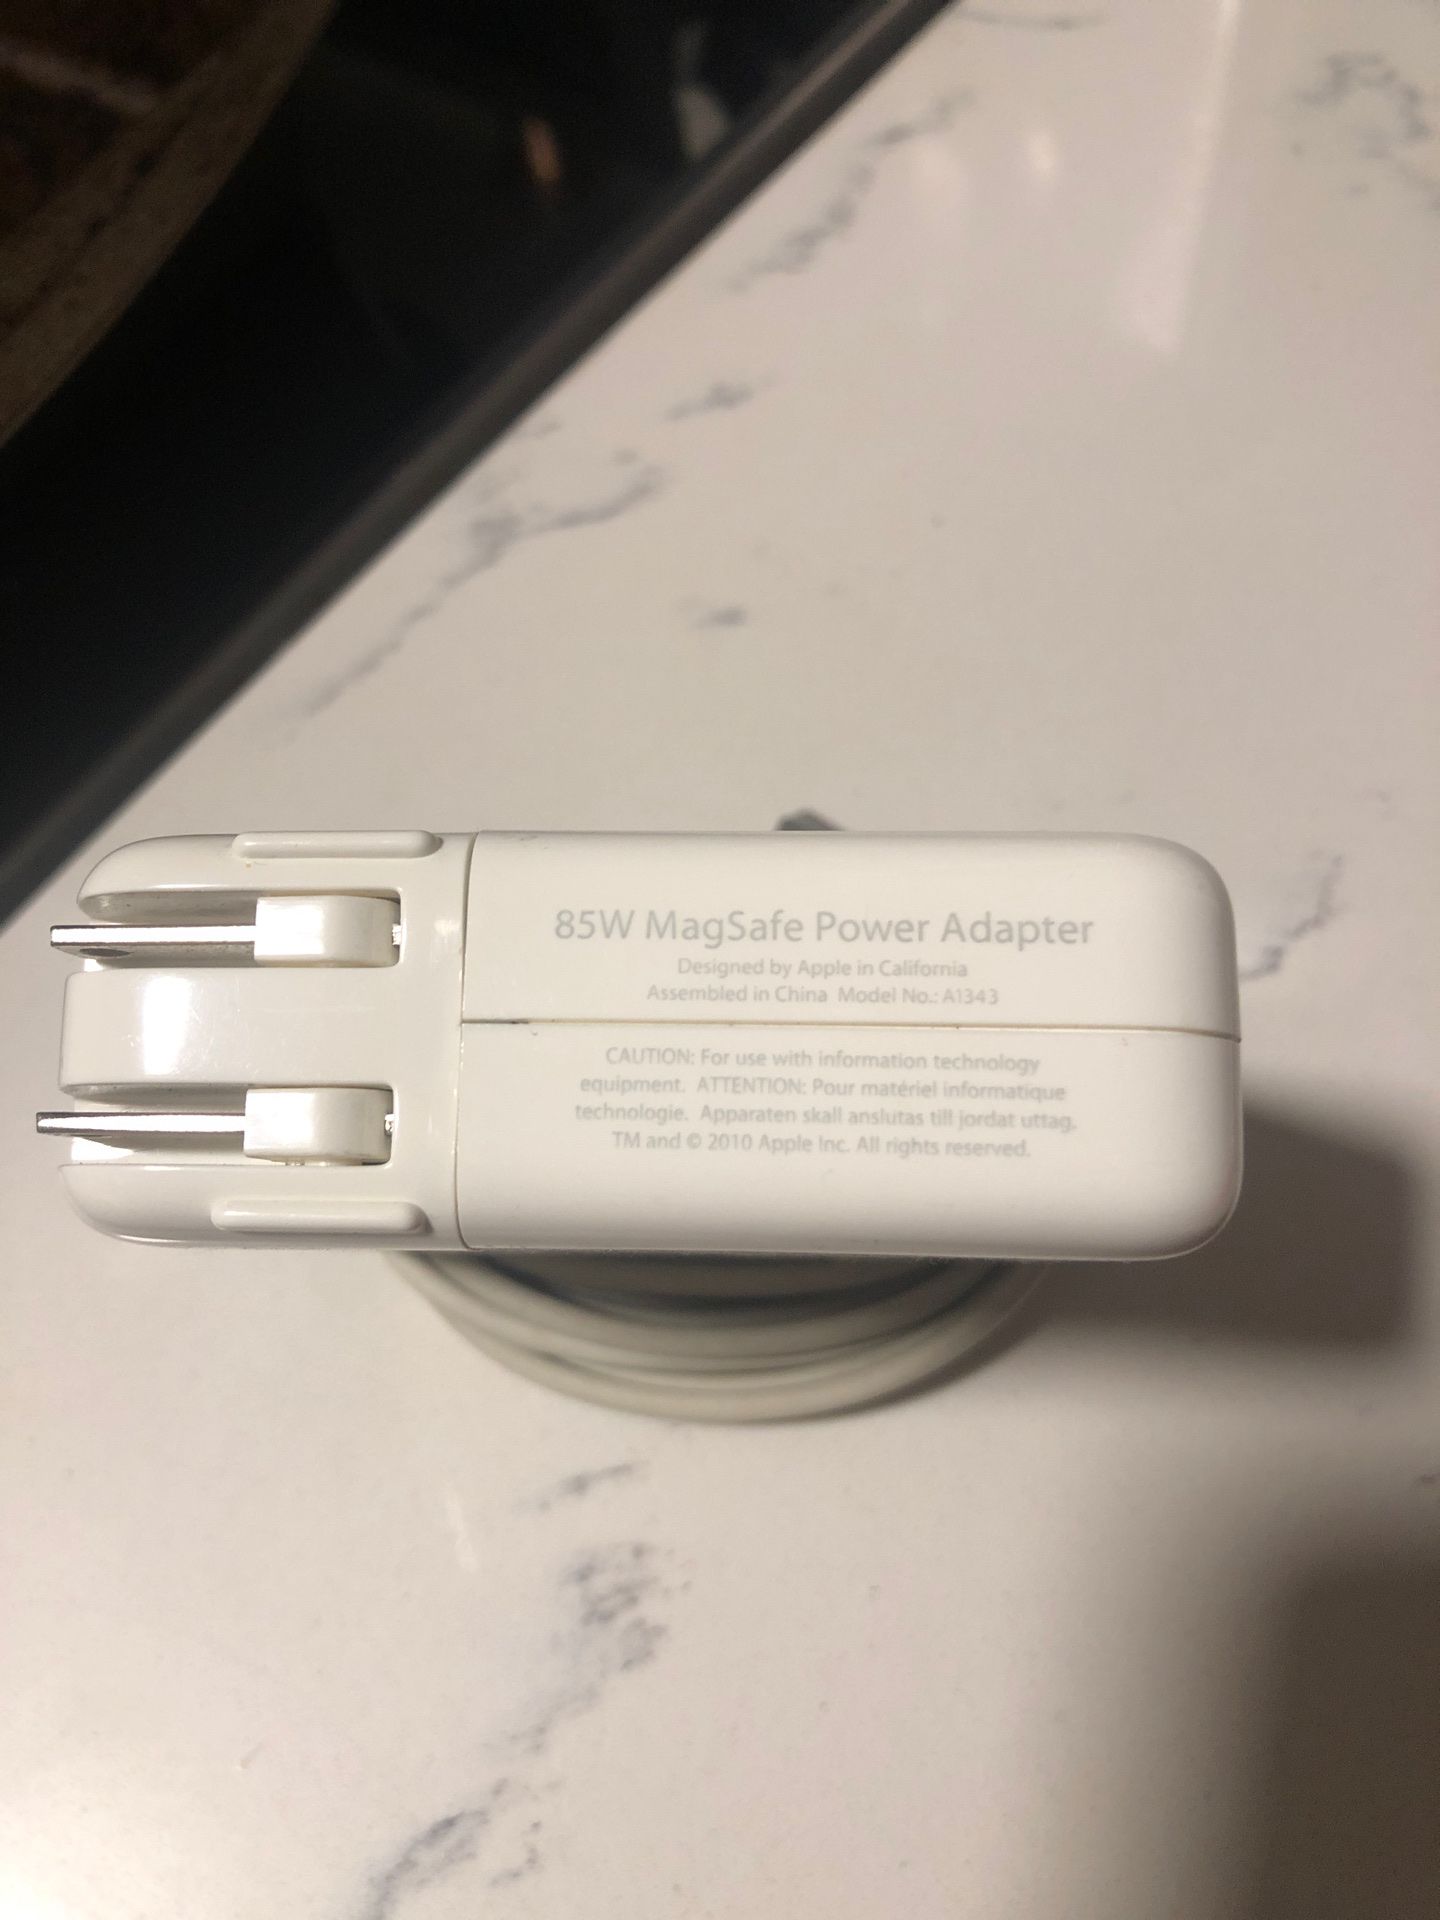 Apple MacBook Pro charger